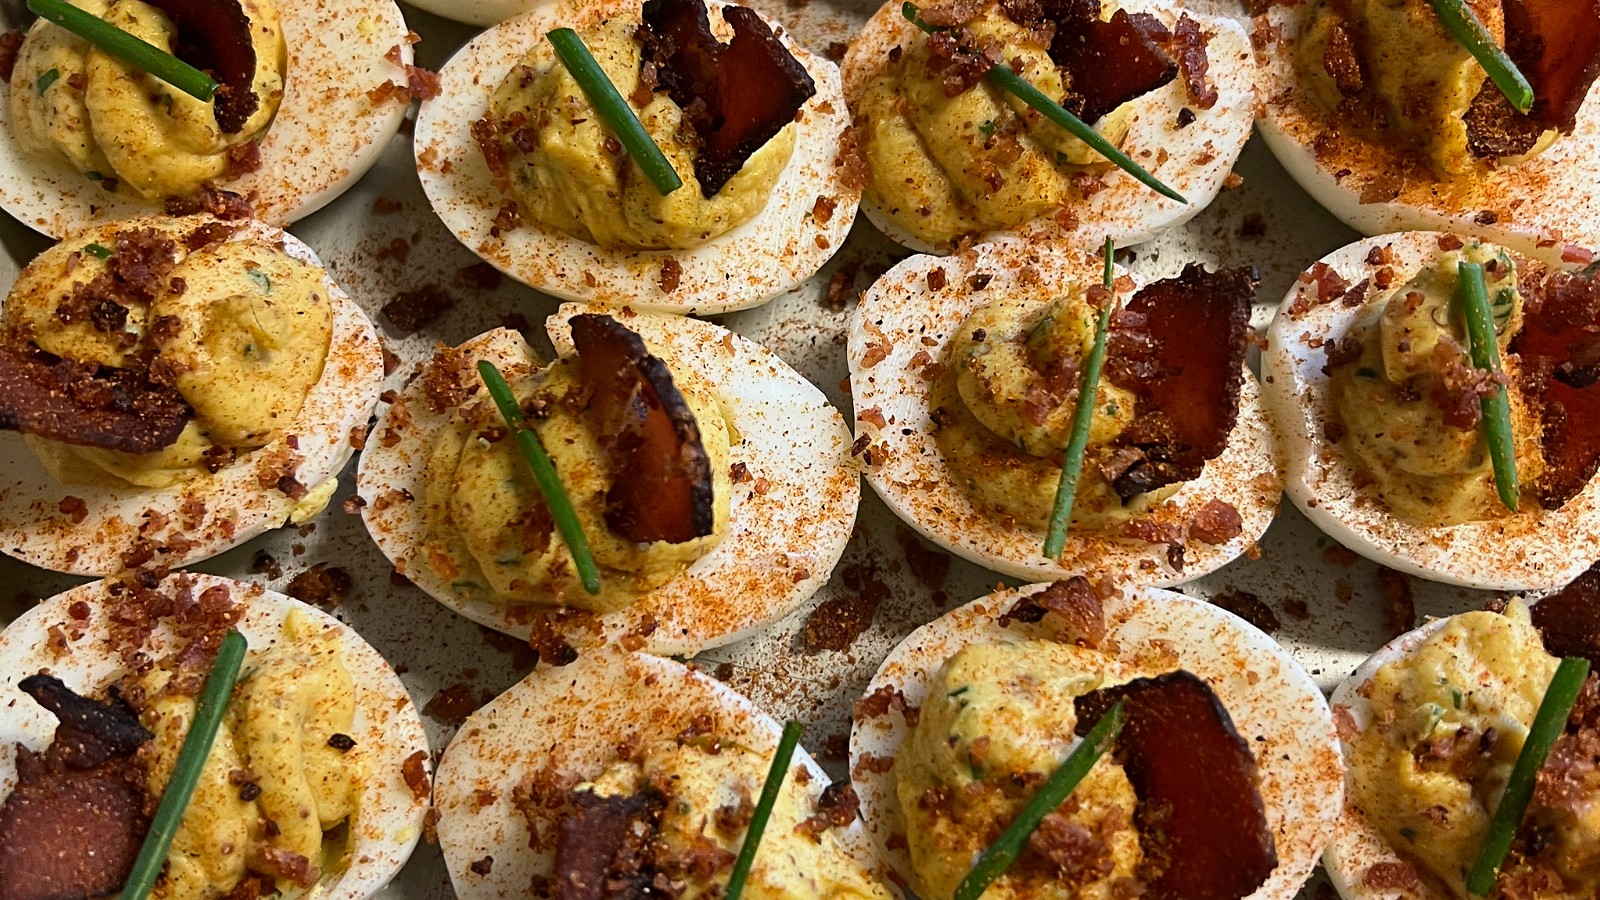 Image of Deviled Eggs